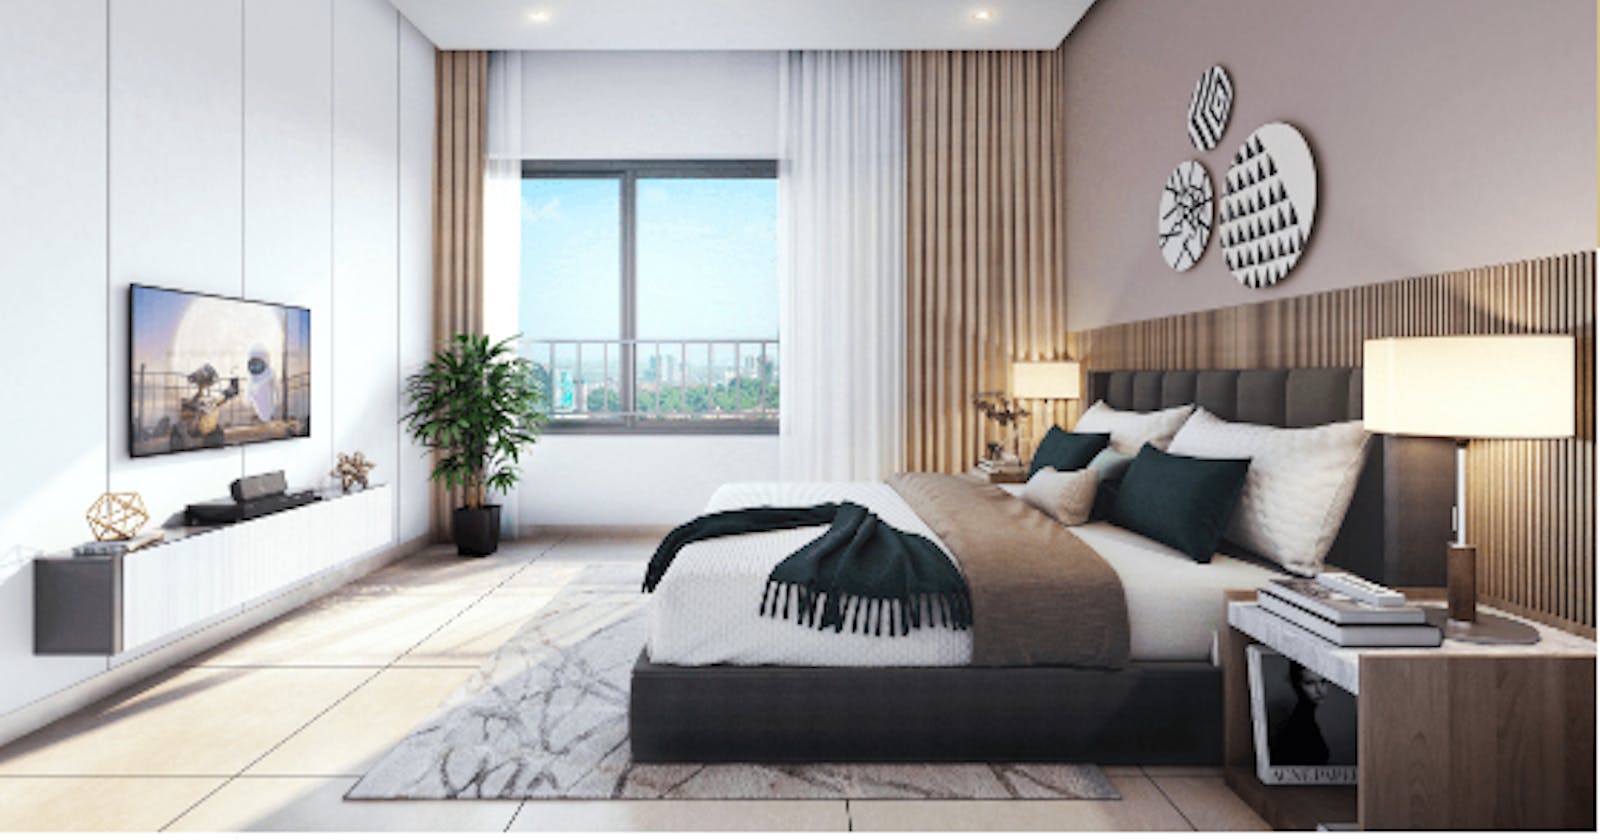 Whiteland The Aspen One Sector 76 Gurgaon: Unveiling Opulent Living in a New Launch by Whiteland